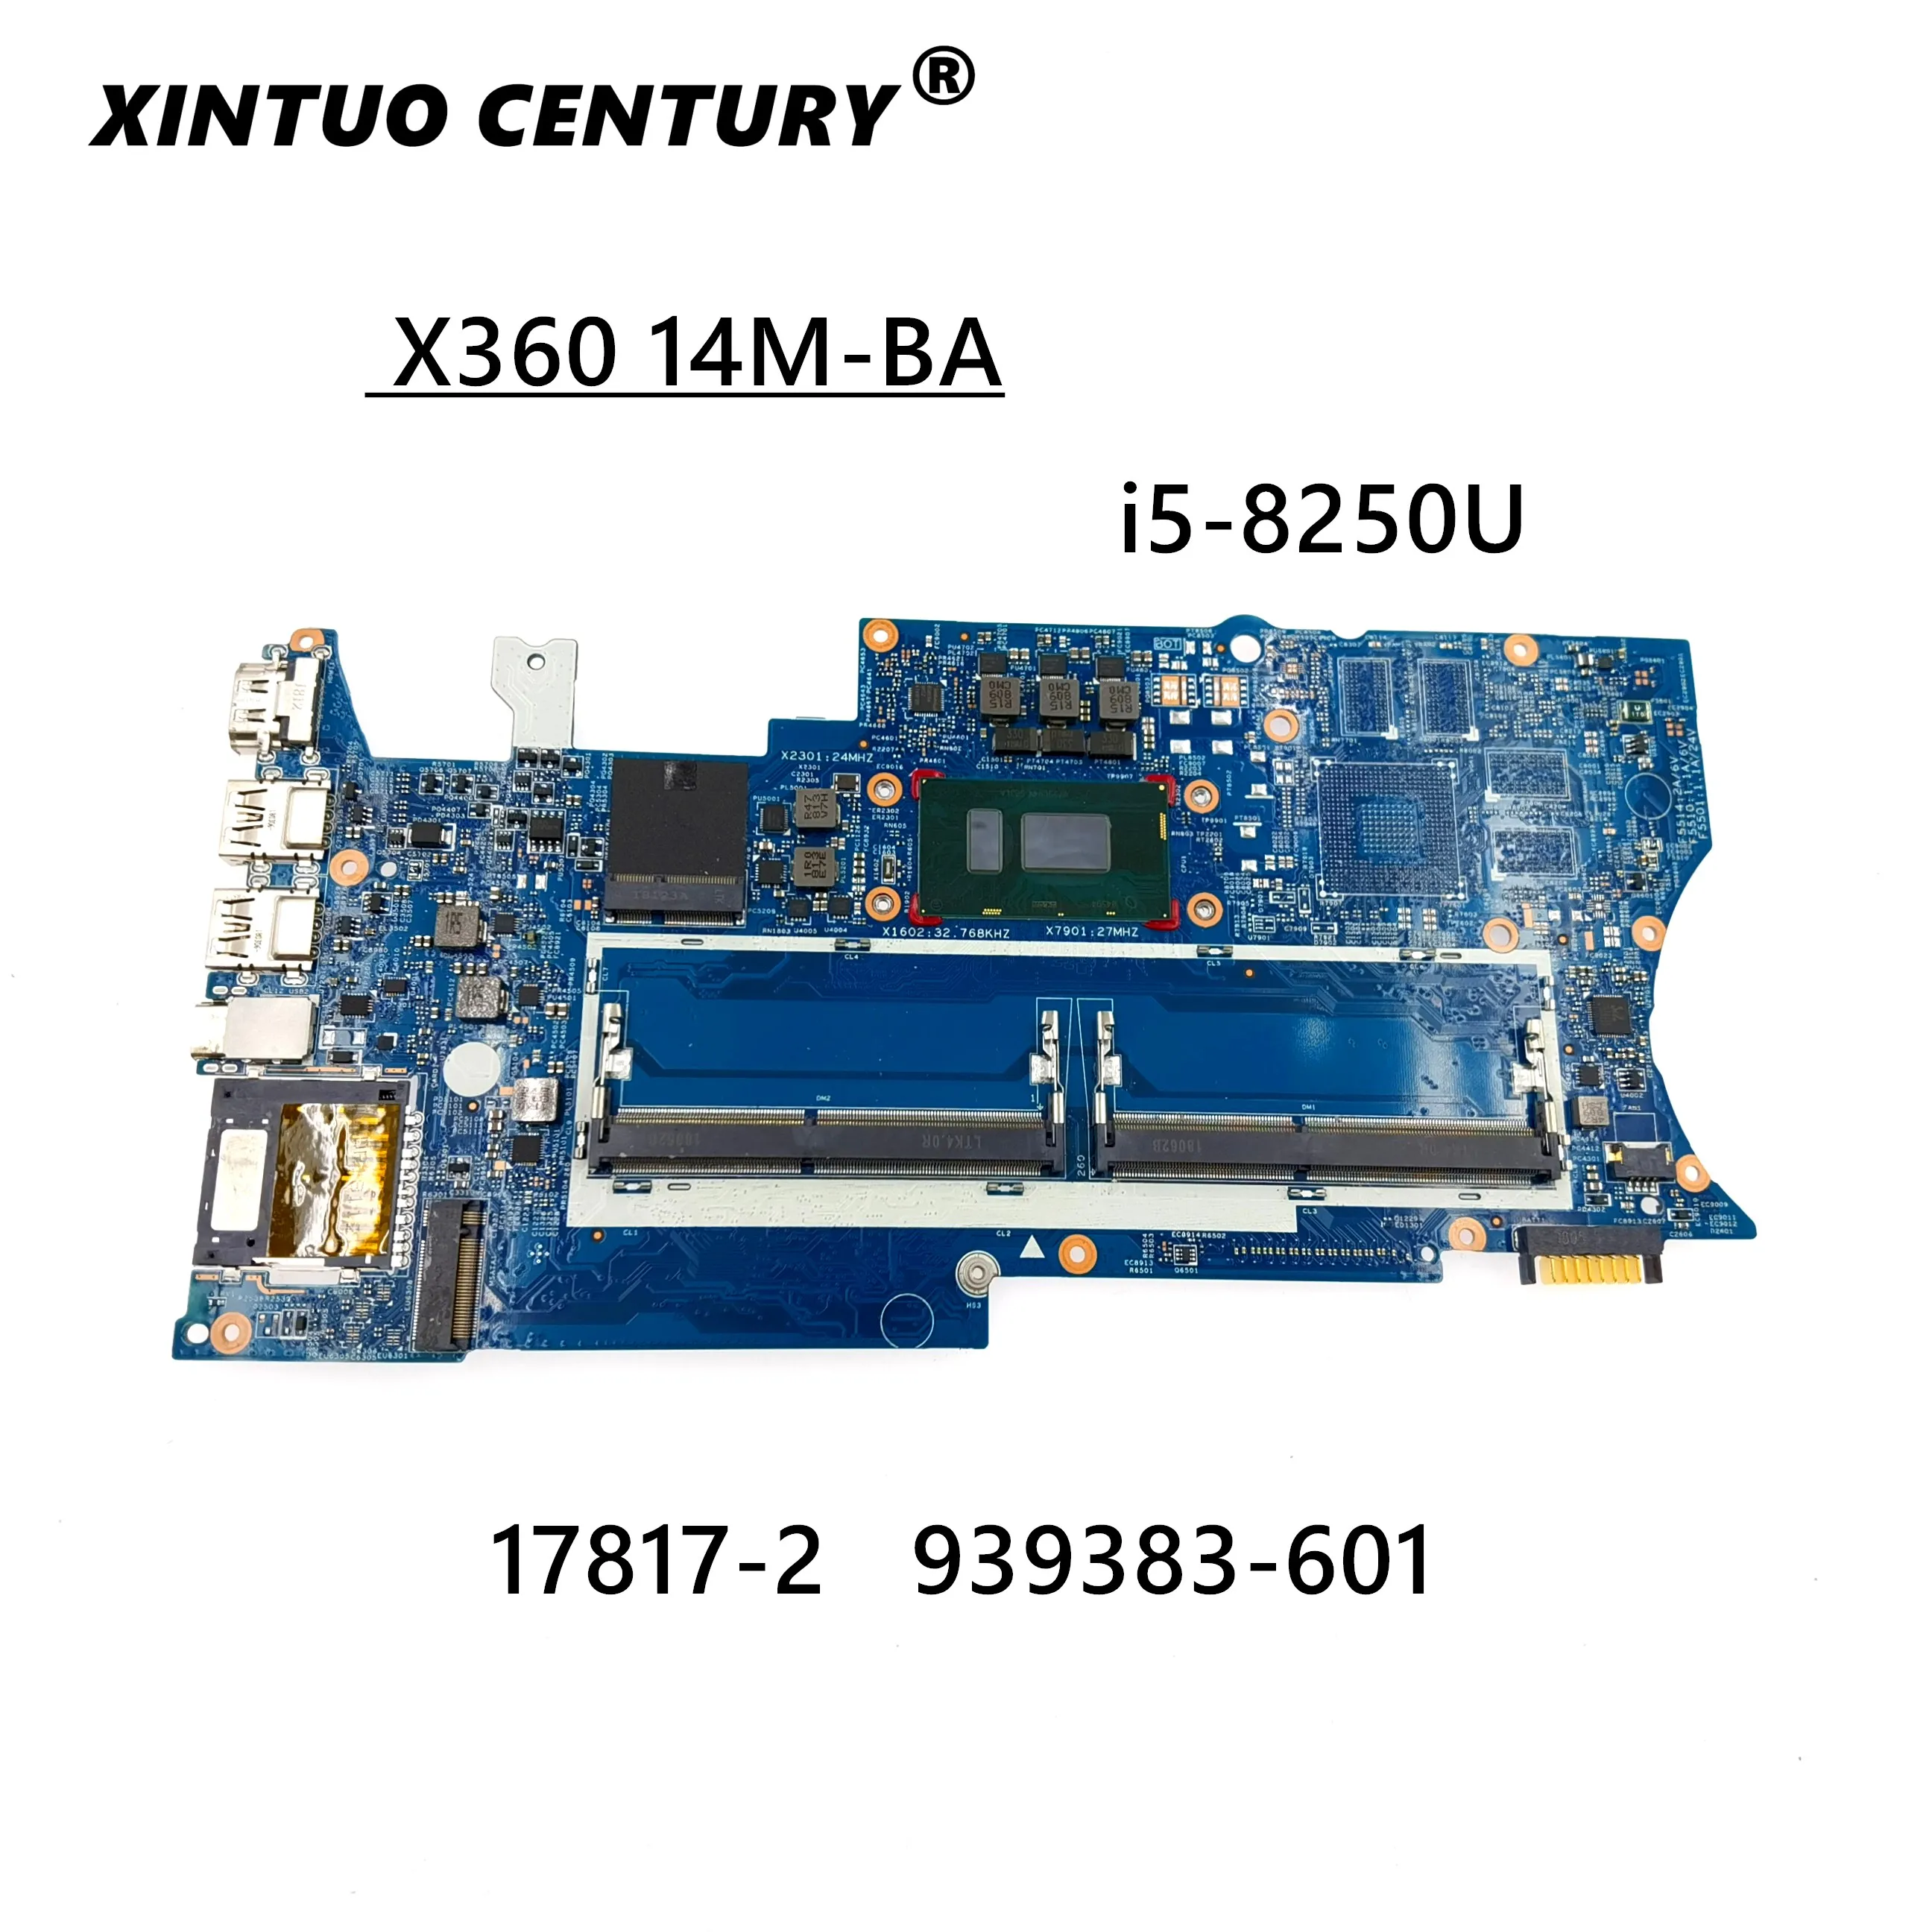 

Notebook Mainboard 939383-001 For HP X360 14M-BA laptop motherboard W/ i5-8250U CPU 939383-601 448.0BZ09.0011 Fully tested